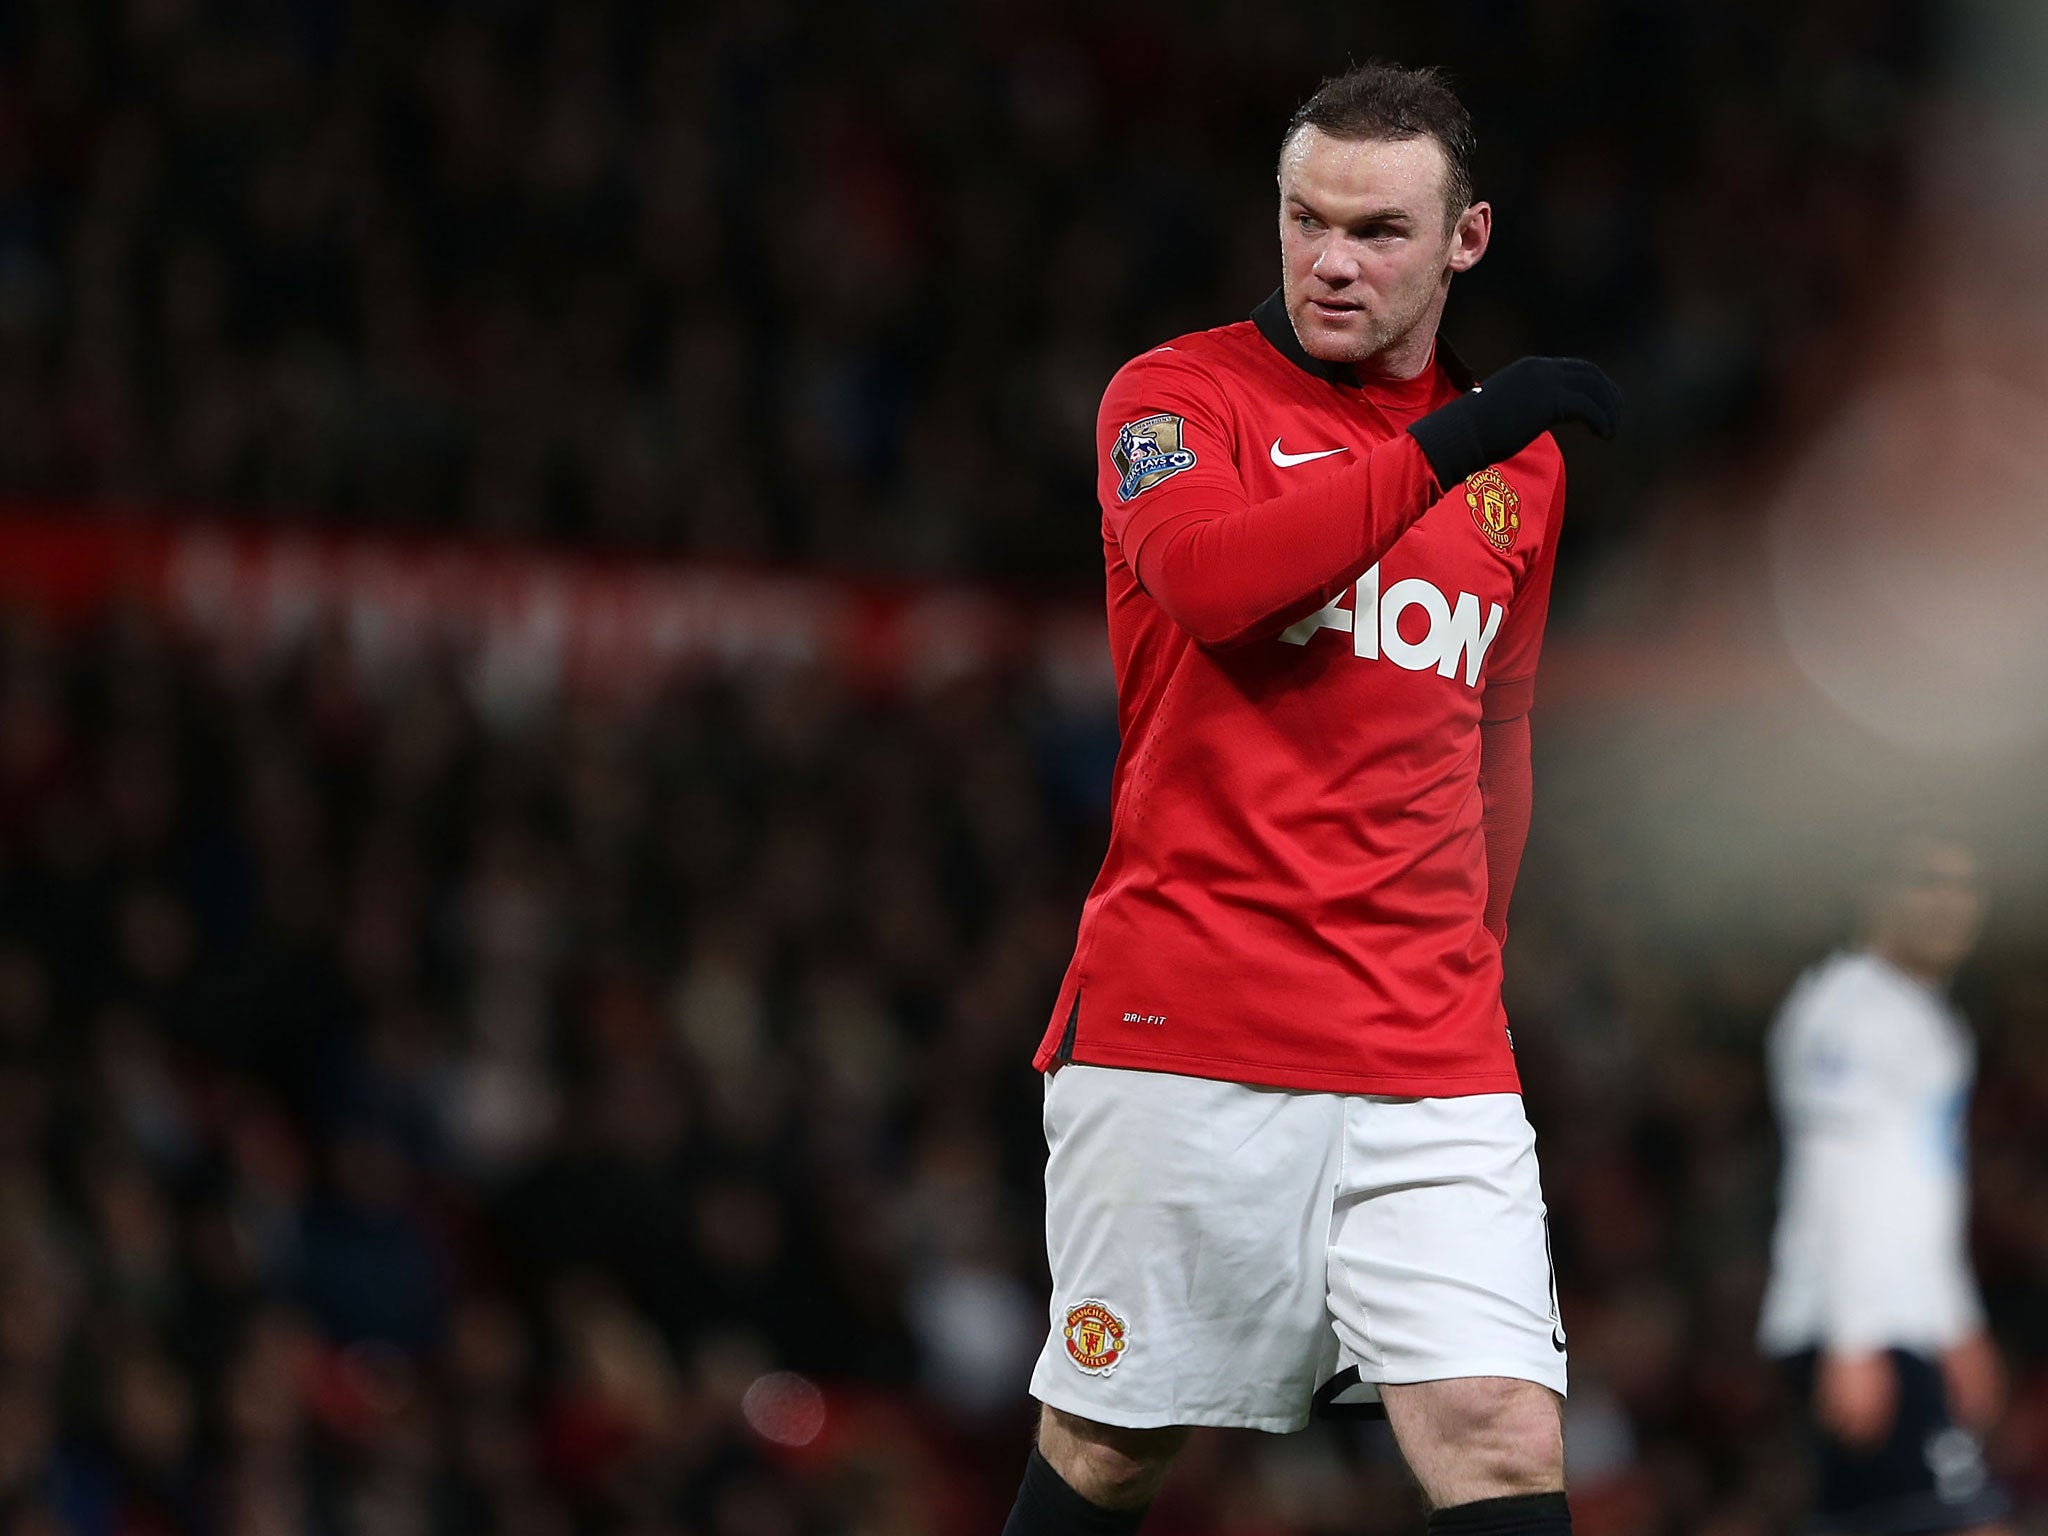 Wayne Rooney is unlikely to feature in Manchester United's trip to Chelsea on Sunday